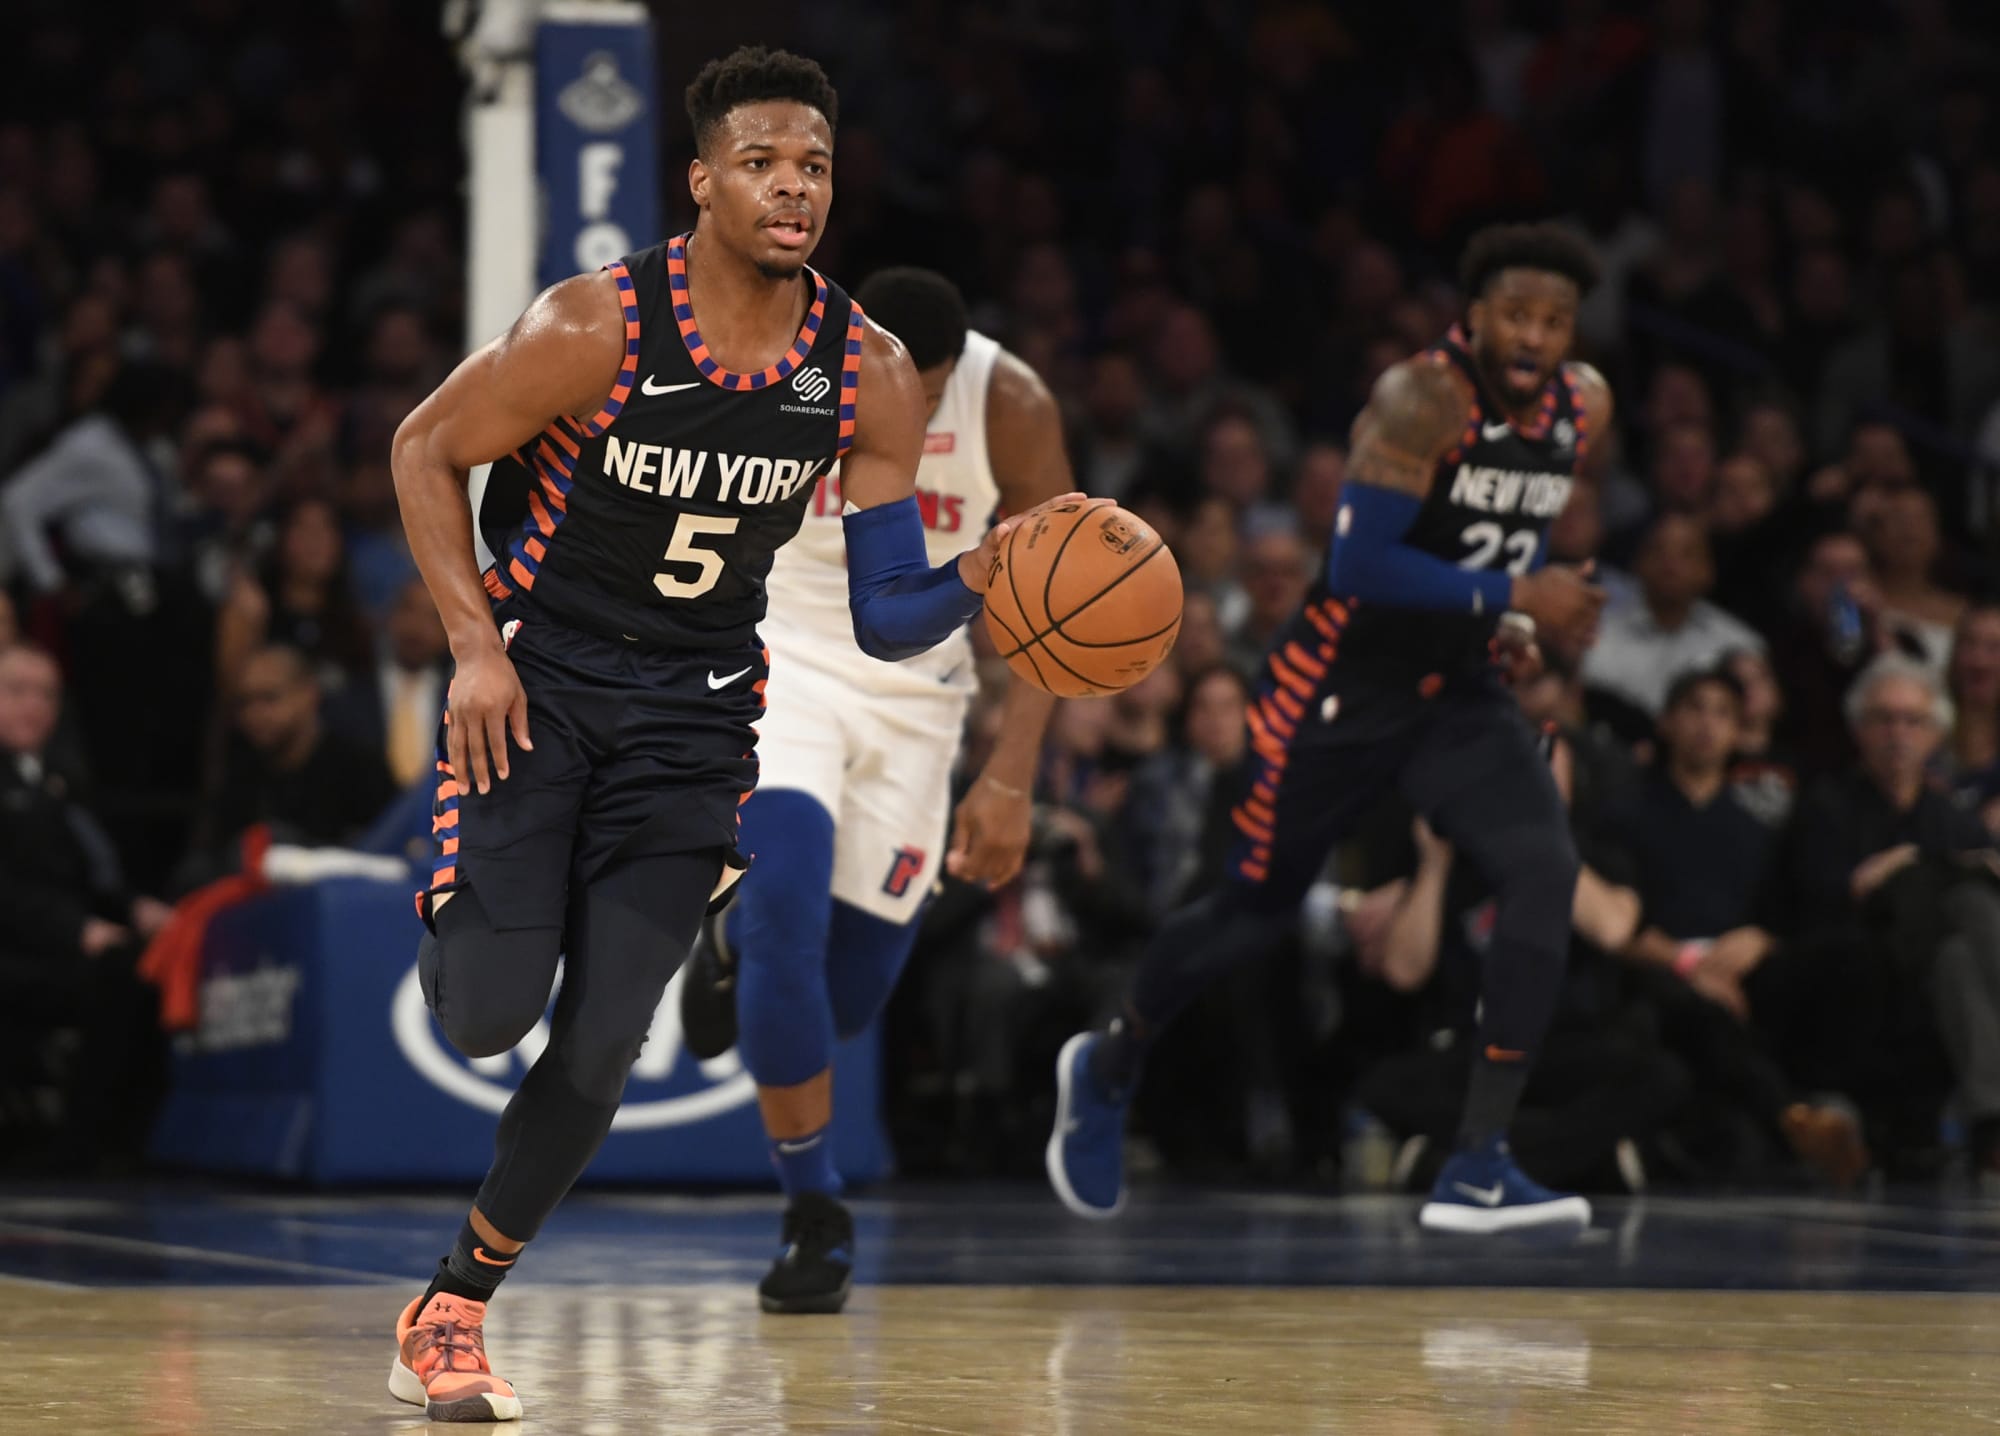 Dennis Smith Jr. looks reborn with Pistons ahead of Knicks matchup